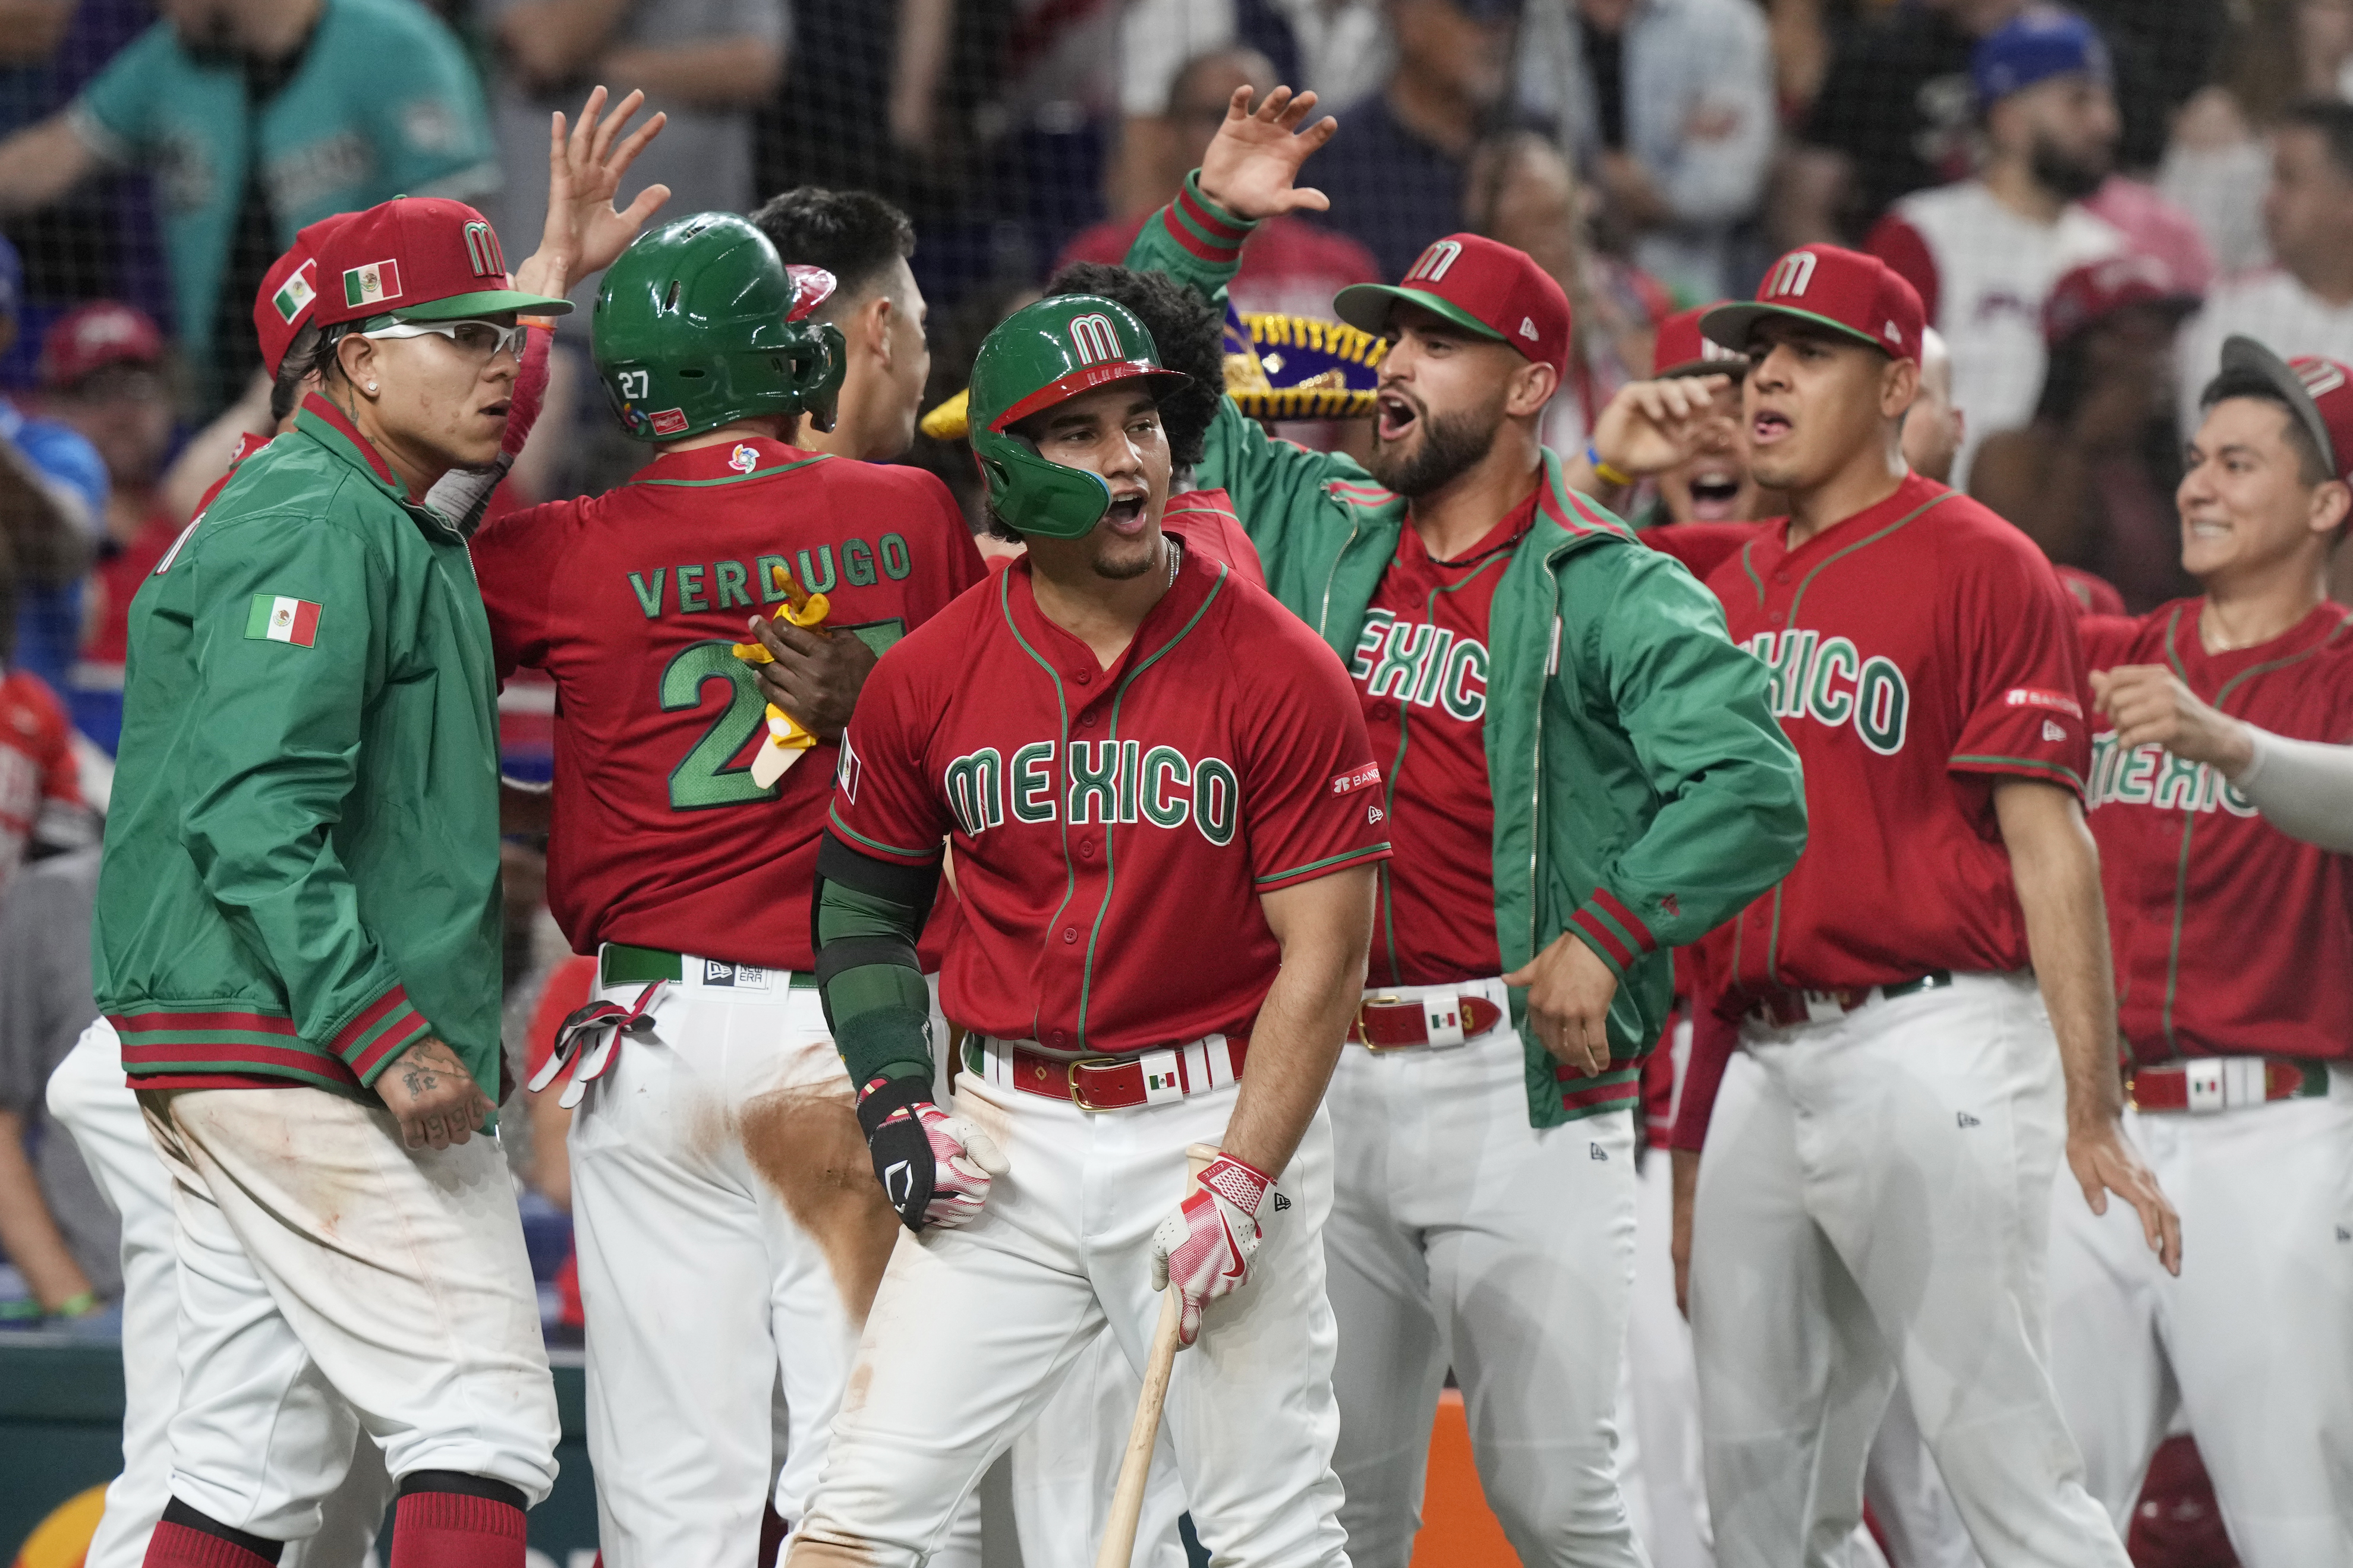 The Mexican team celebrates with Alex Verdugo (27) after he scored a run in the seventh inning in the baseball game against Puerto Rico in the World Baseball Classic, Friday, March 17, 2023, in Miami.  (AP Photo/Marta Lavandier)